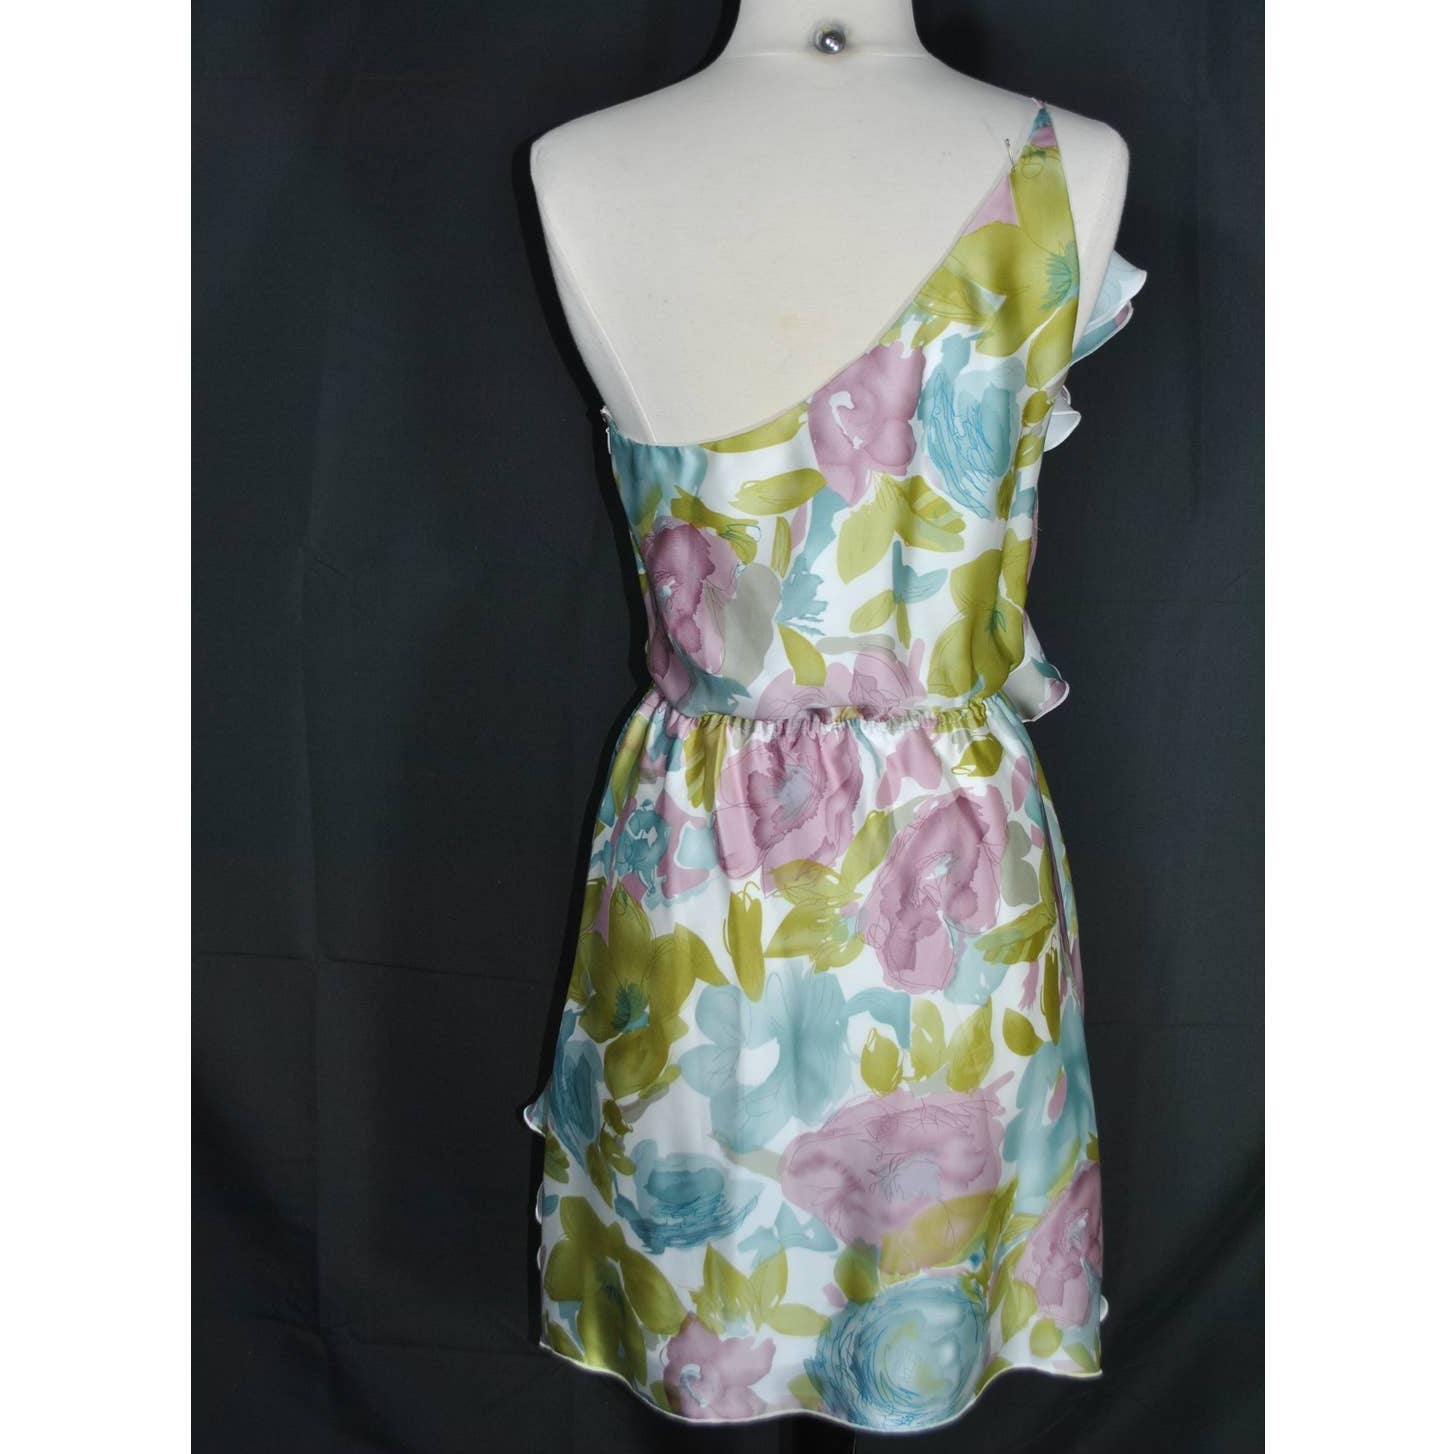 NWT Arden B One Shoulder Floral Ruffle Dress- S